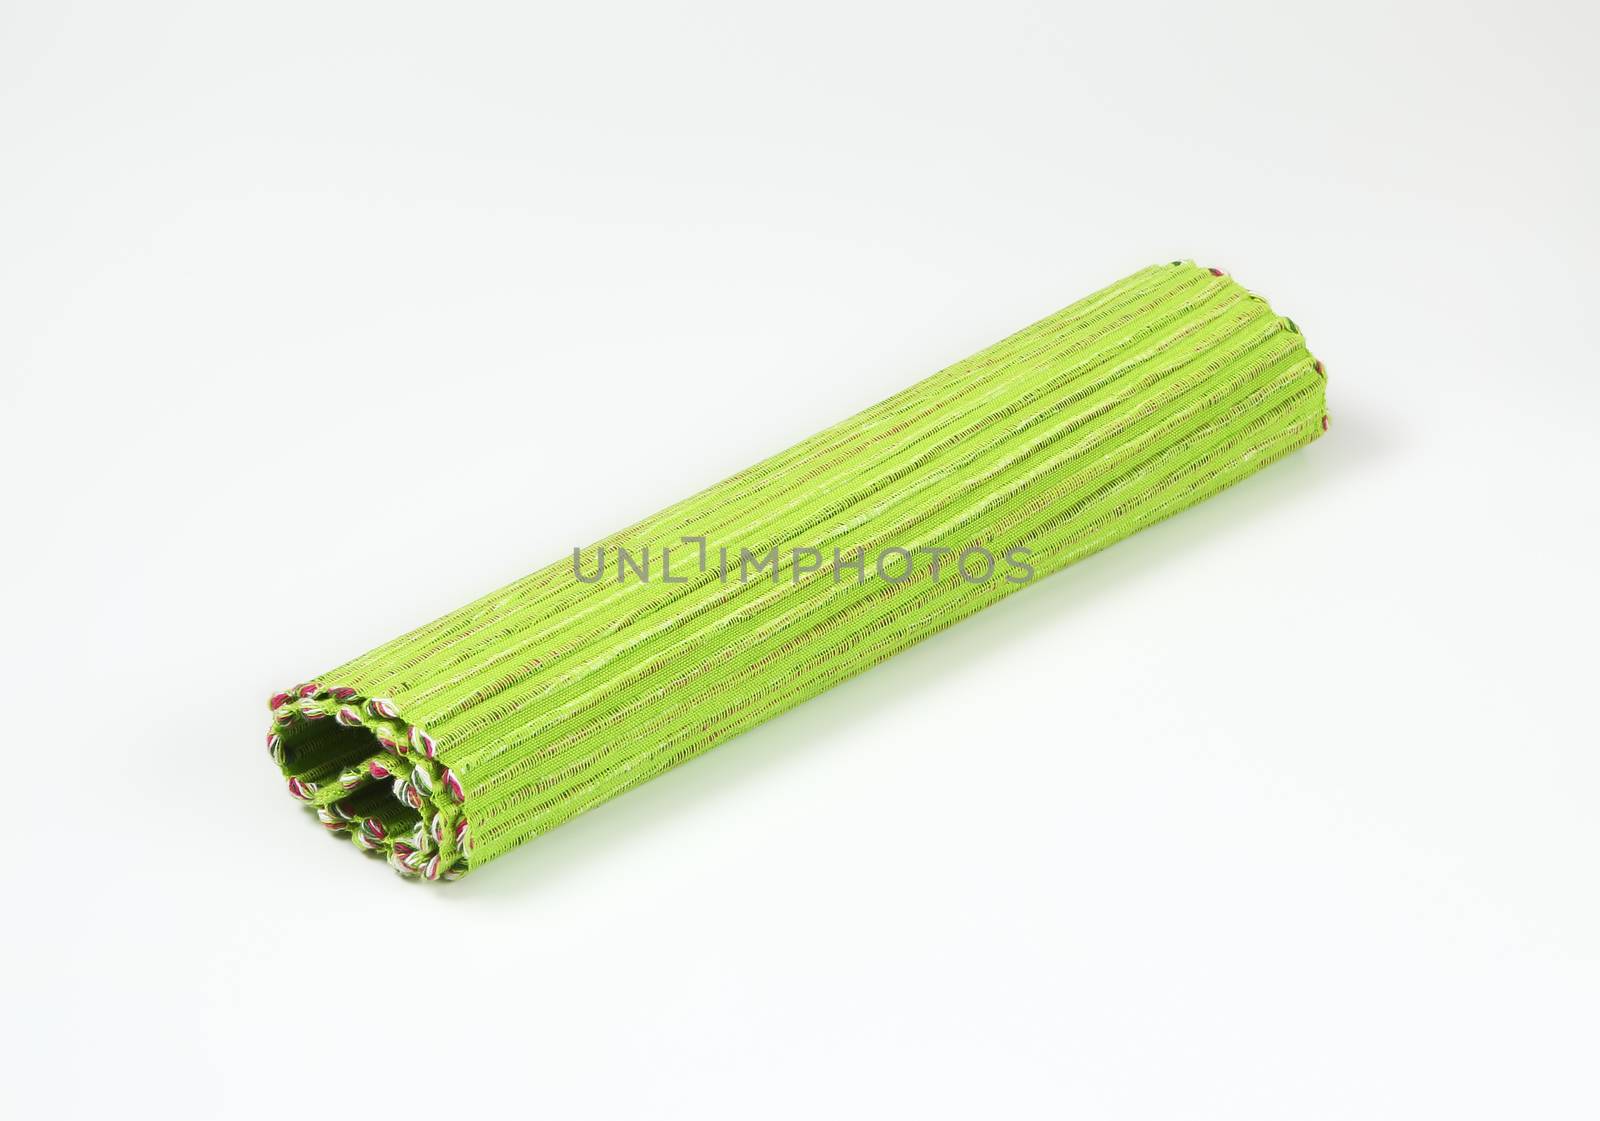 Ribbed green placemat by Digifoodstock